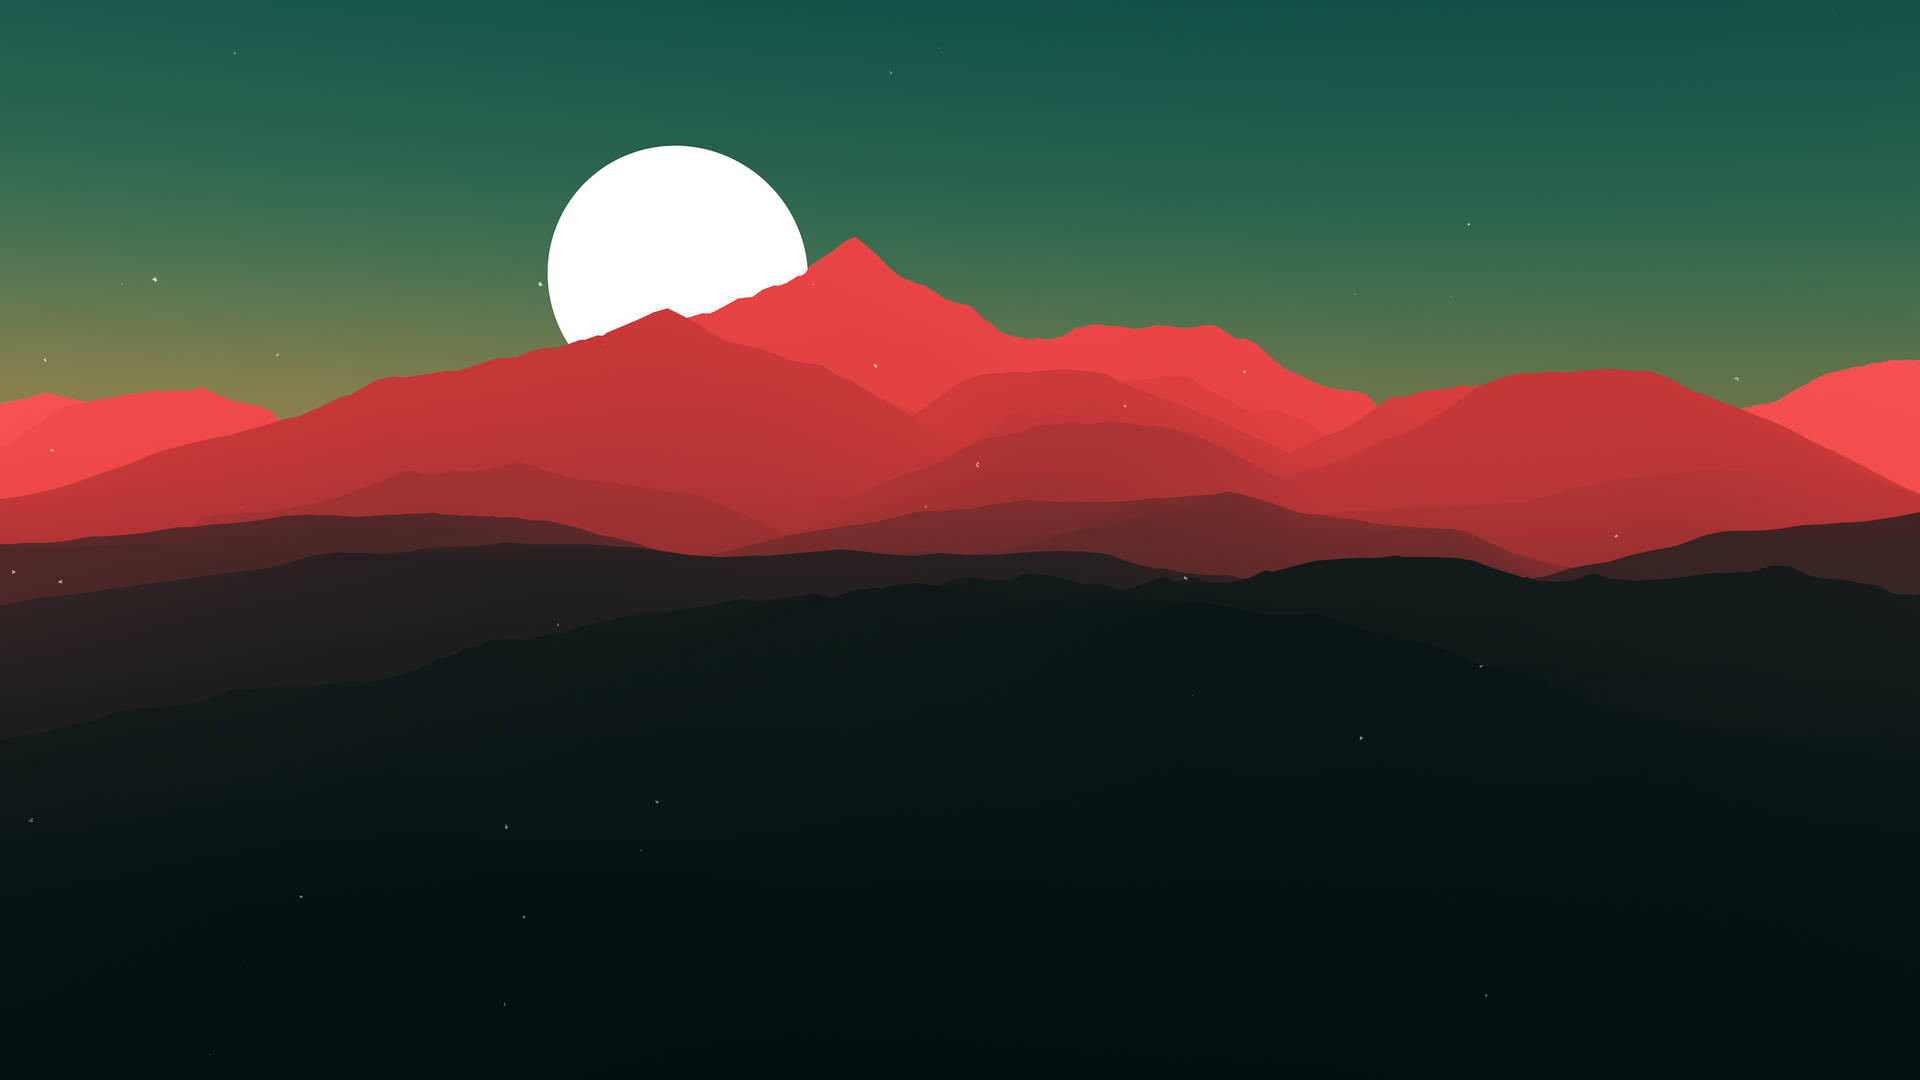 Red Mountain And White Moon Art Background